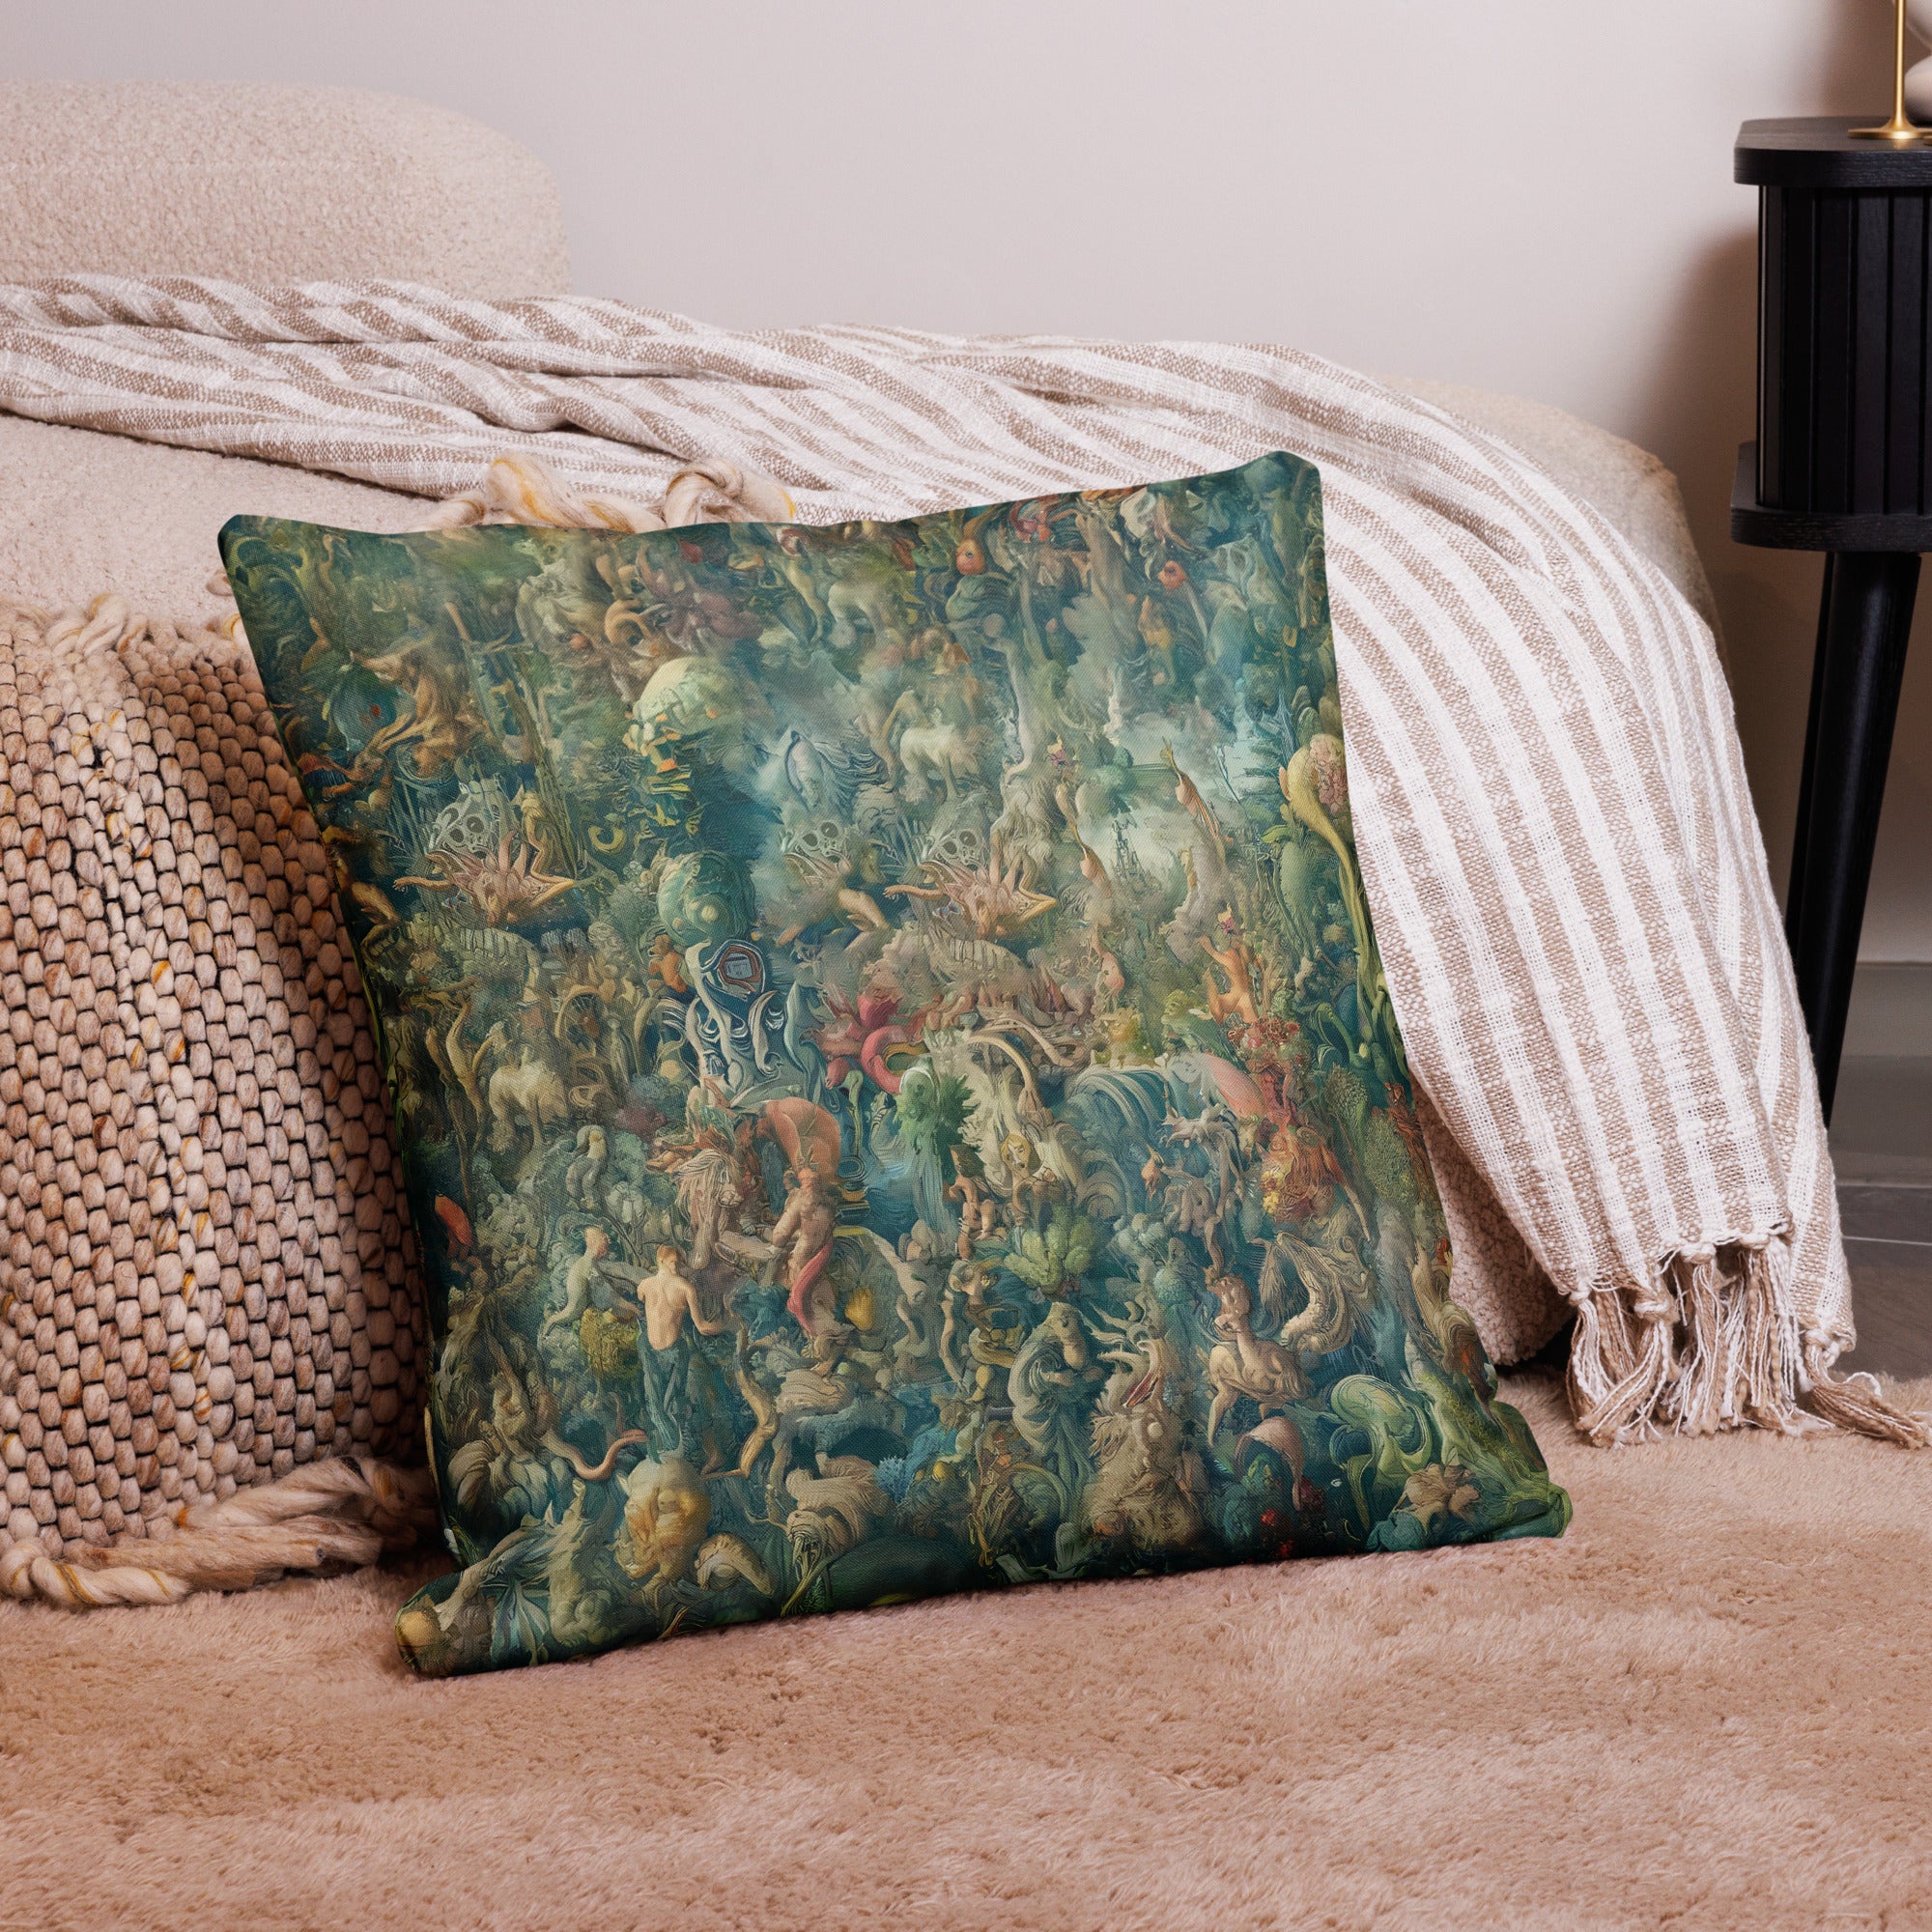 Hieronymus Bosch 'The Garden of Earthly Delights' Famous Painting Premium Pillow | Premium Art Cushion